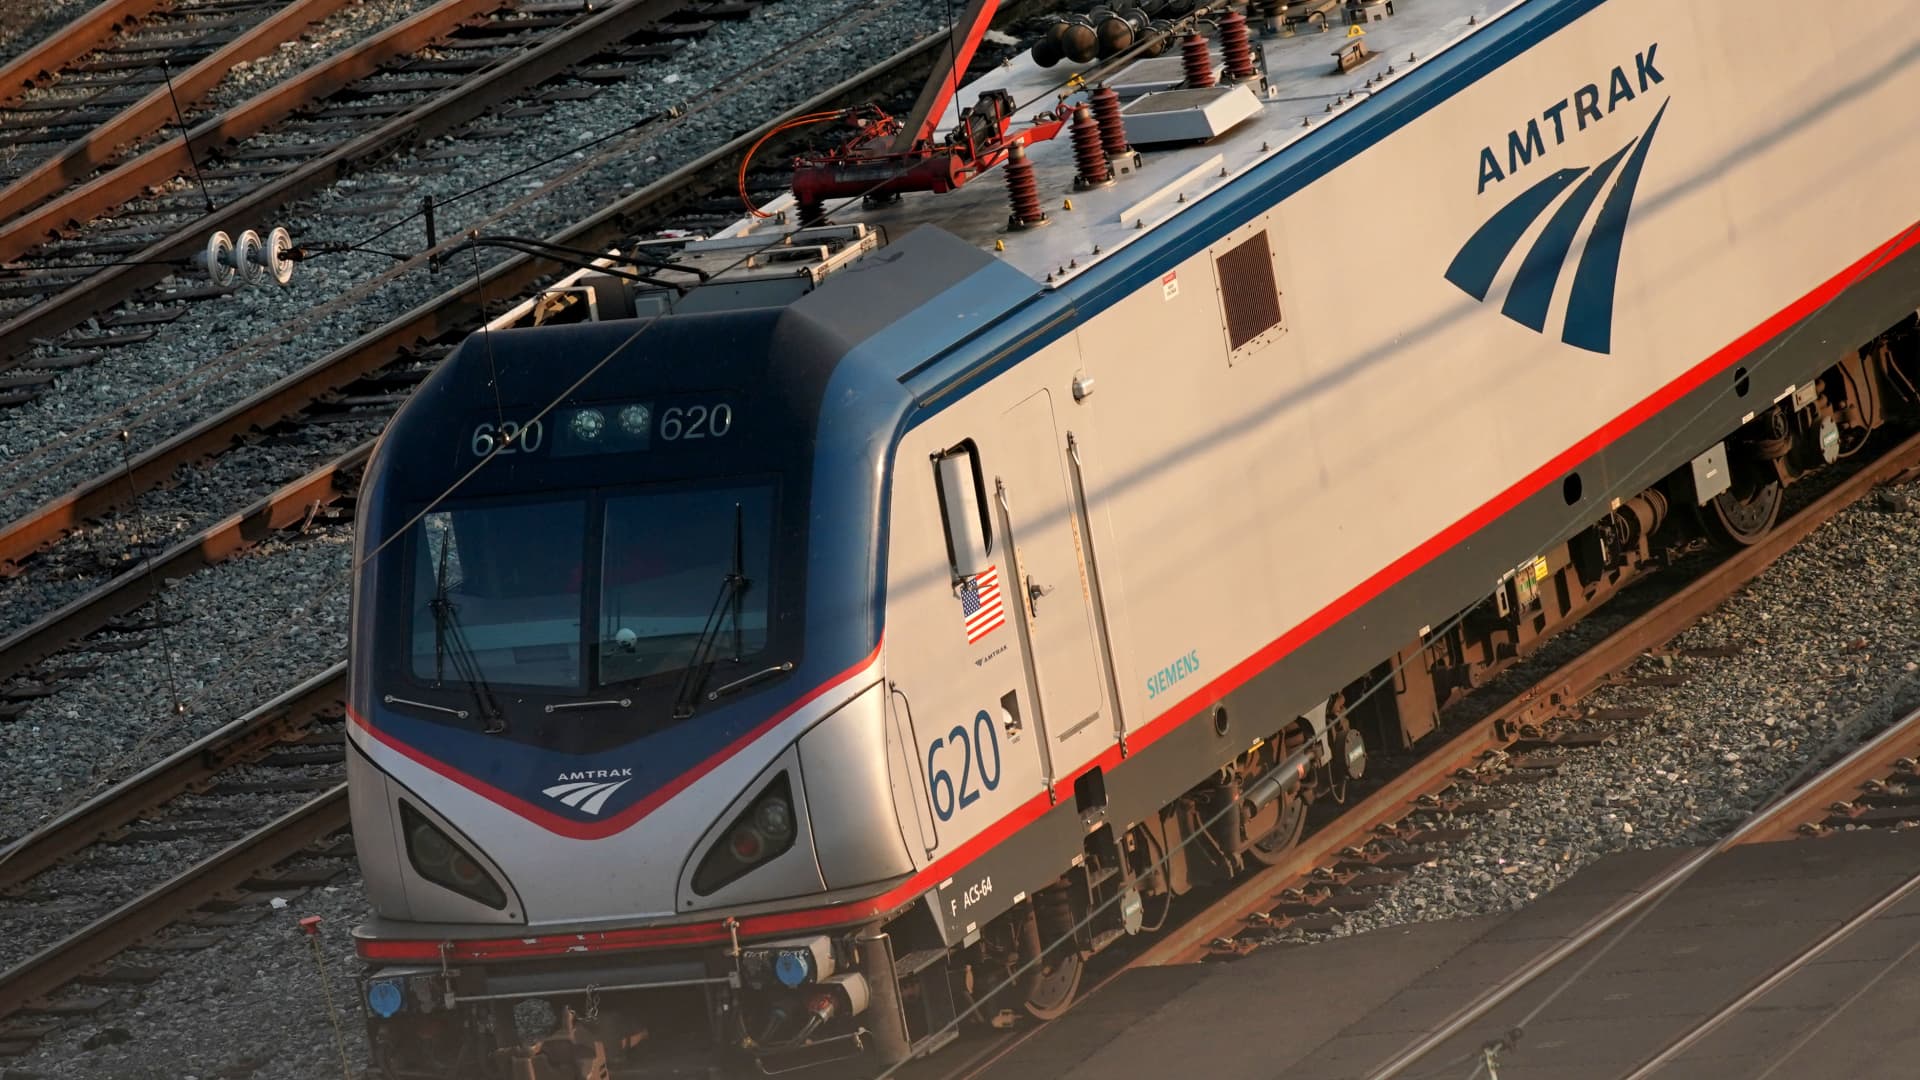 Travelers ride the rails to save money (and the planet) as Amtrak chases pre-Covid ridership